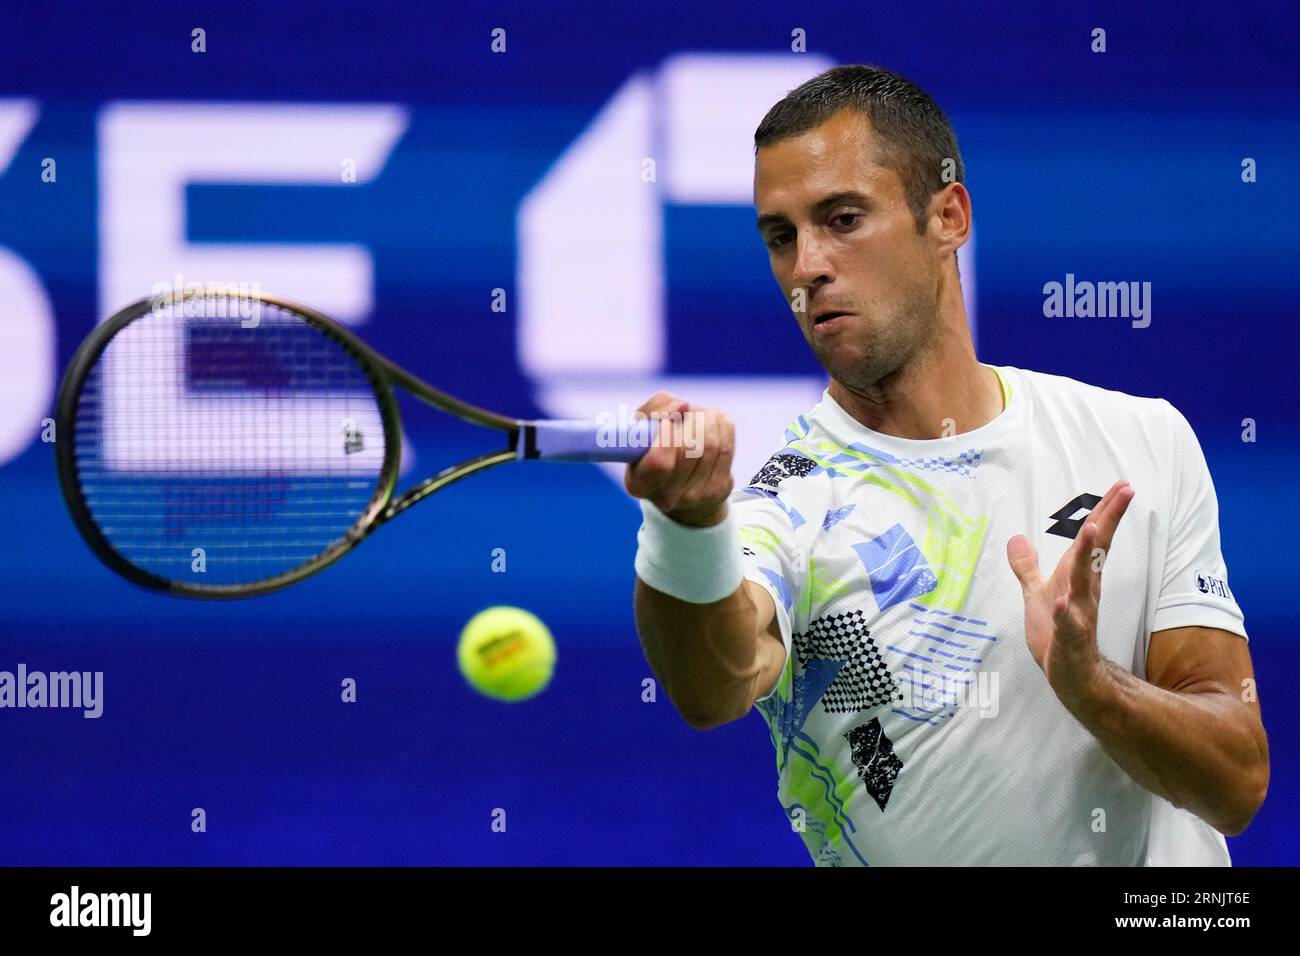 Laslo Djere, of Serbia, returns a shot to Novak Djokovic, of Serbia, during the third round of the U.S. Open tennis championships, Friday, Sept